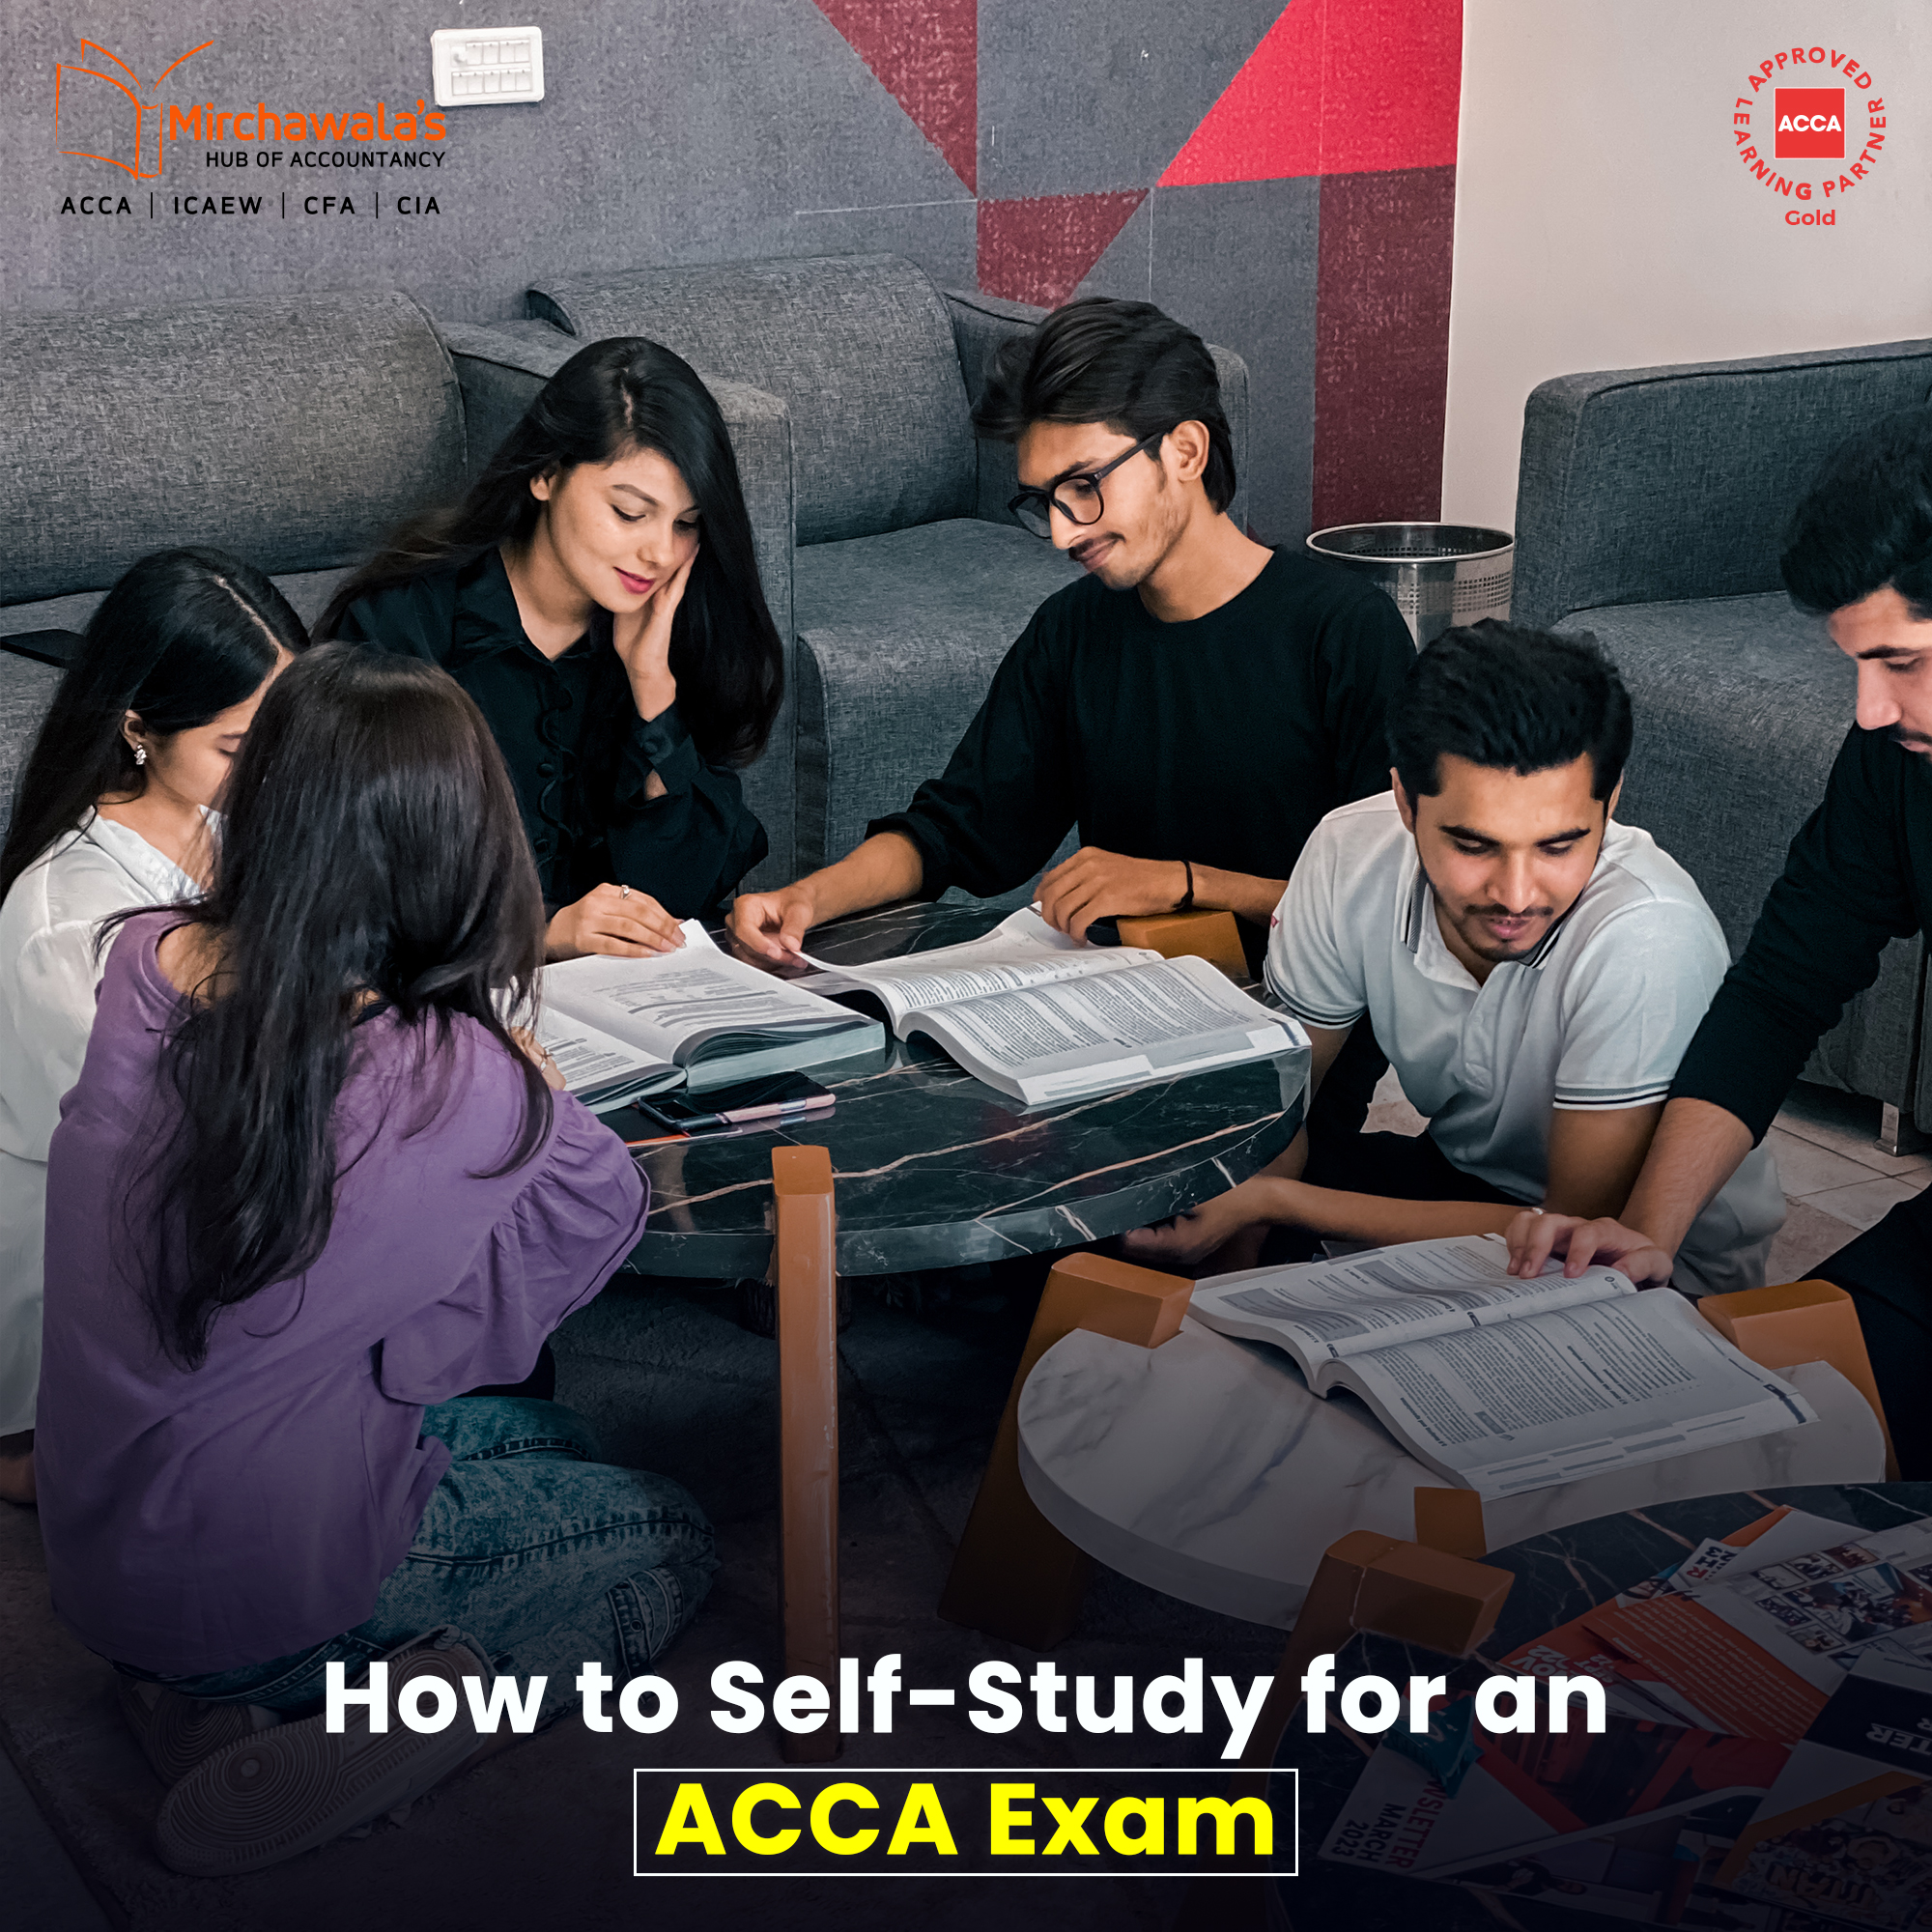 How to Self-Study for an ACCA Exam — Checkout these Quick Tips